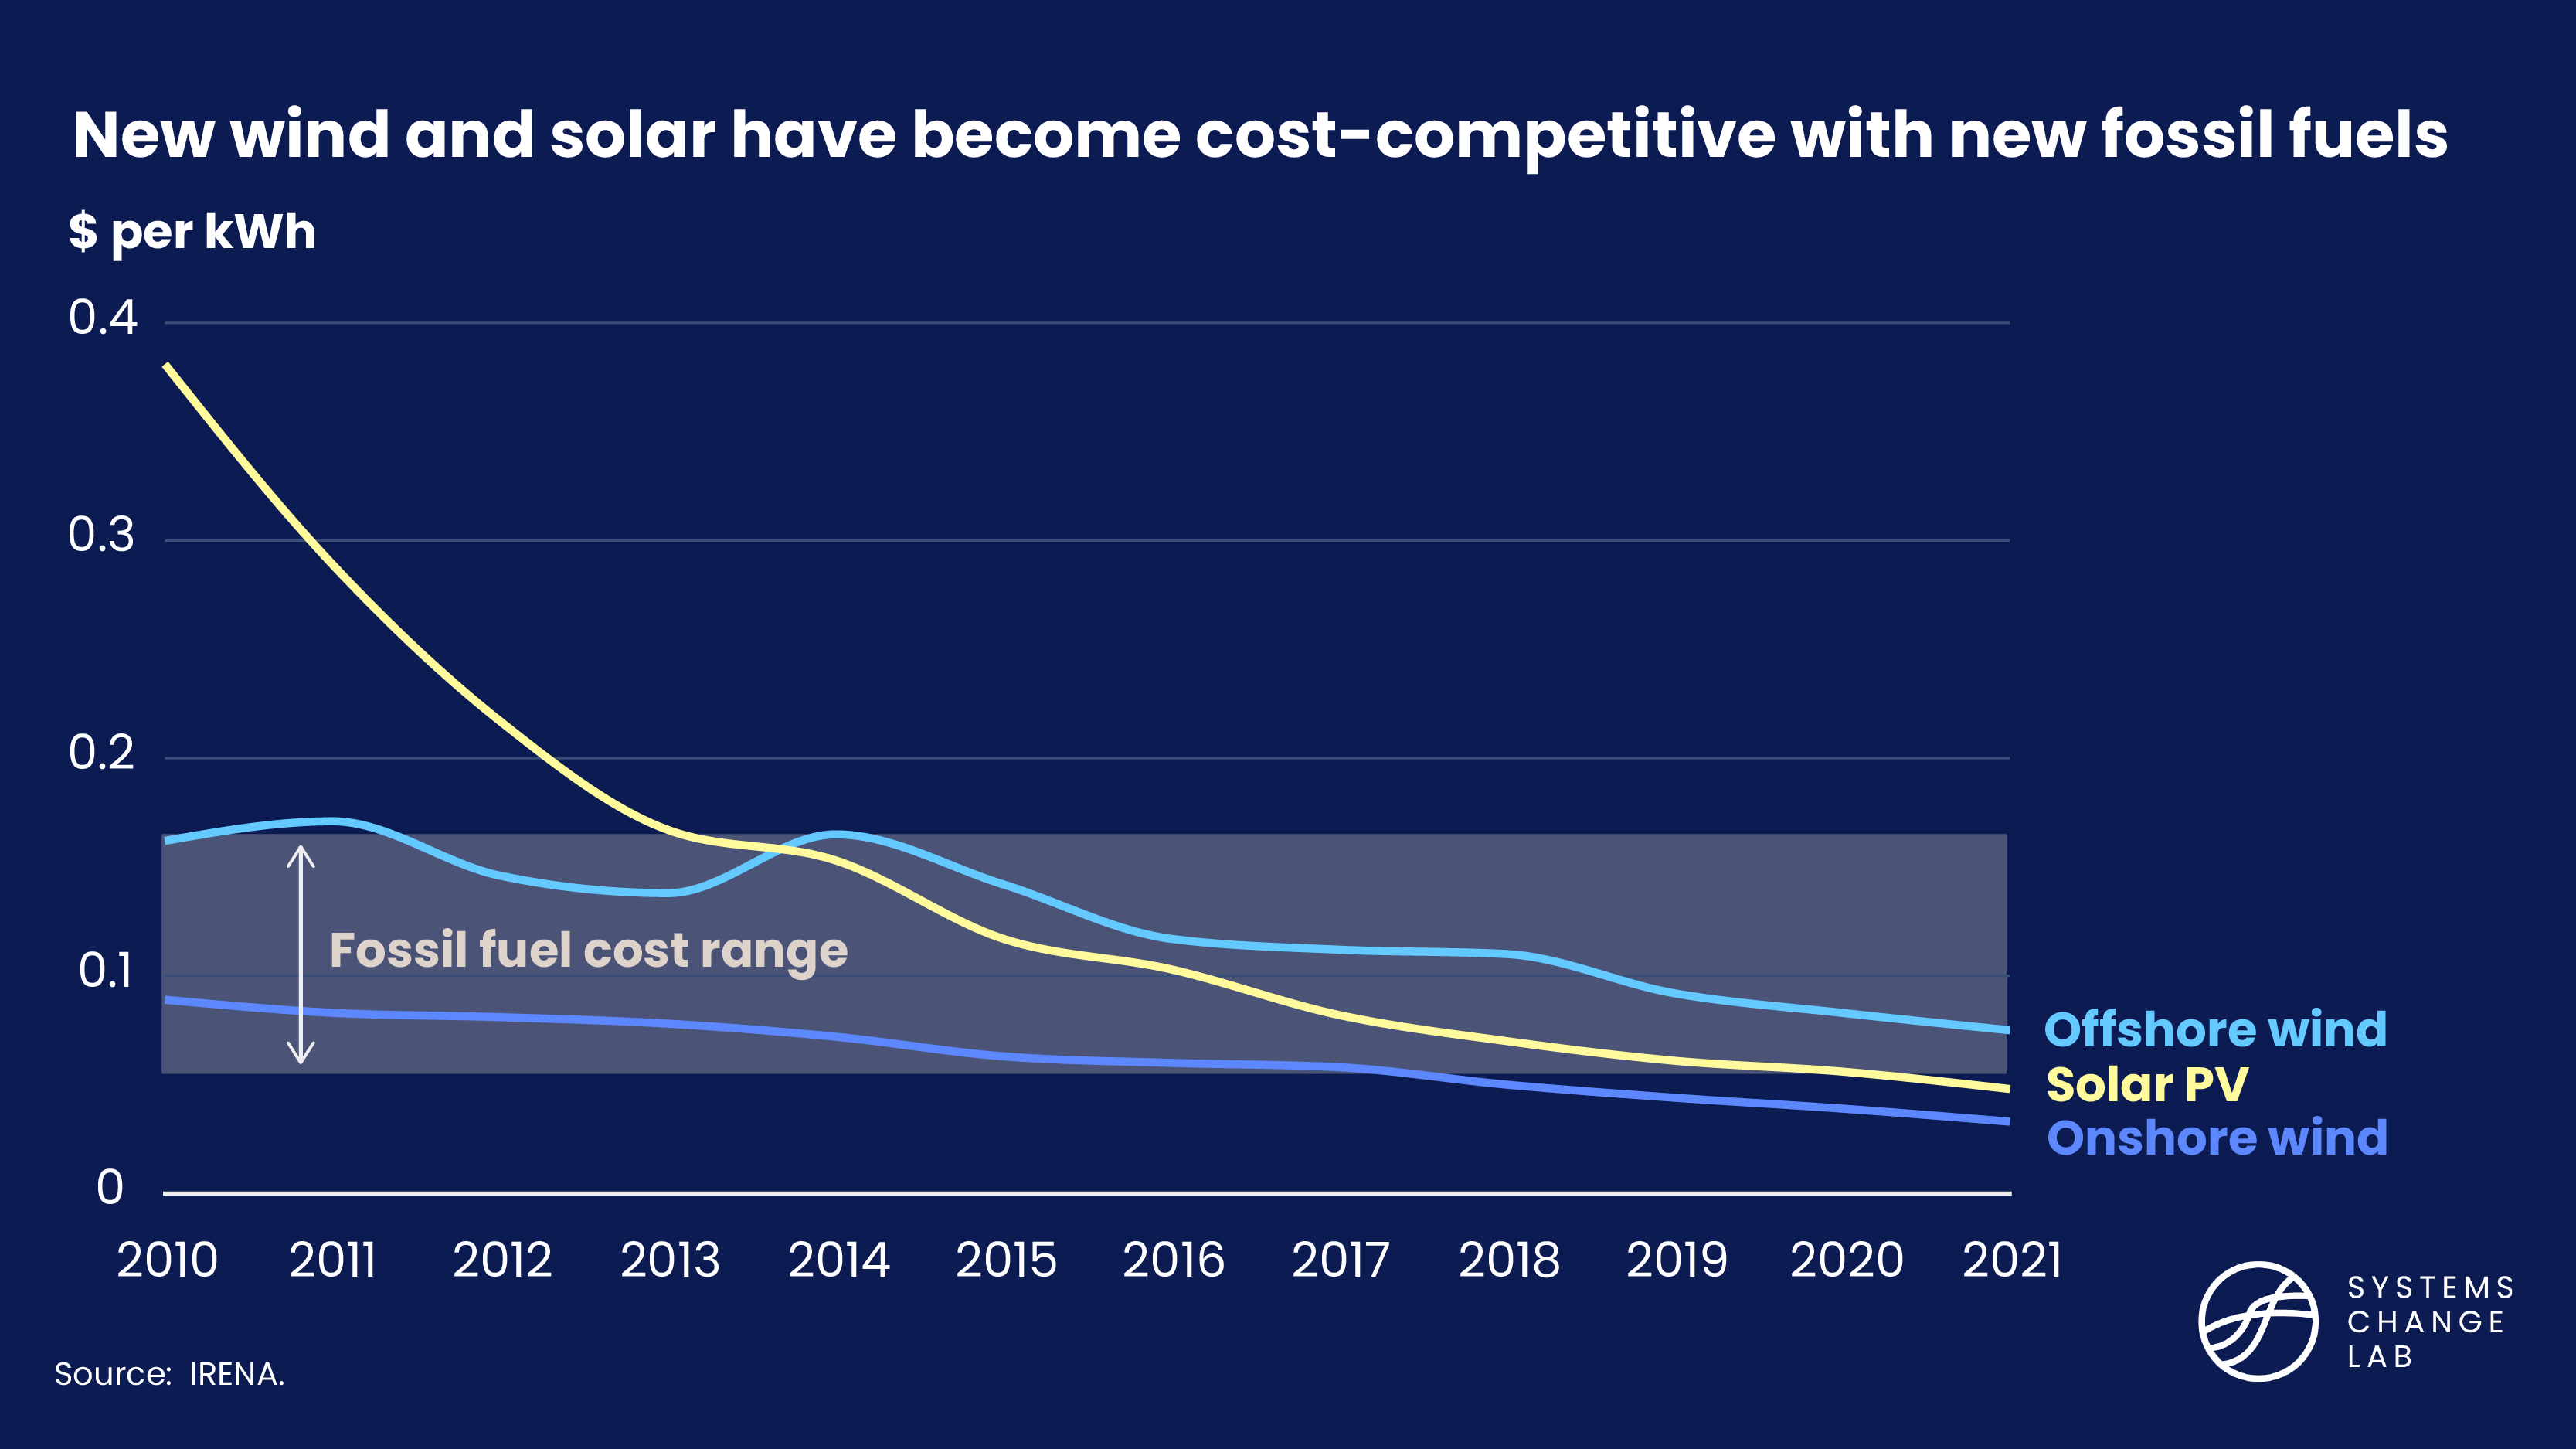 cost of new renewables compared to fossil fuel cost range, New wind and solar have become cost-competitive with new fossil fuel generation